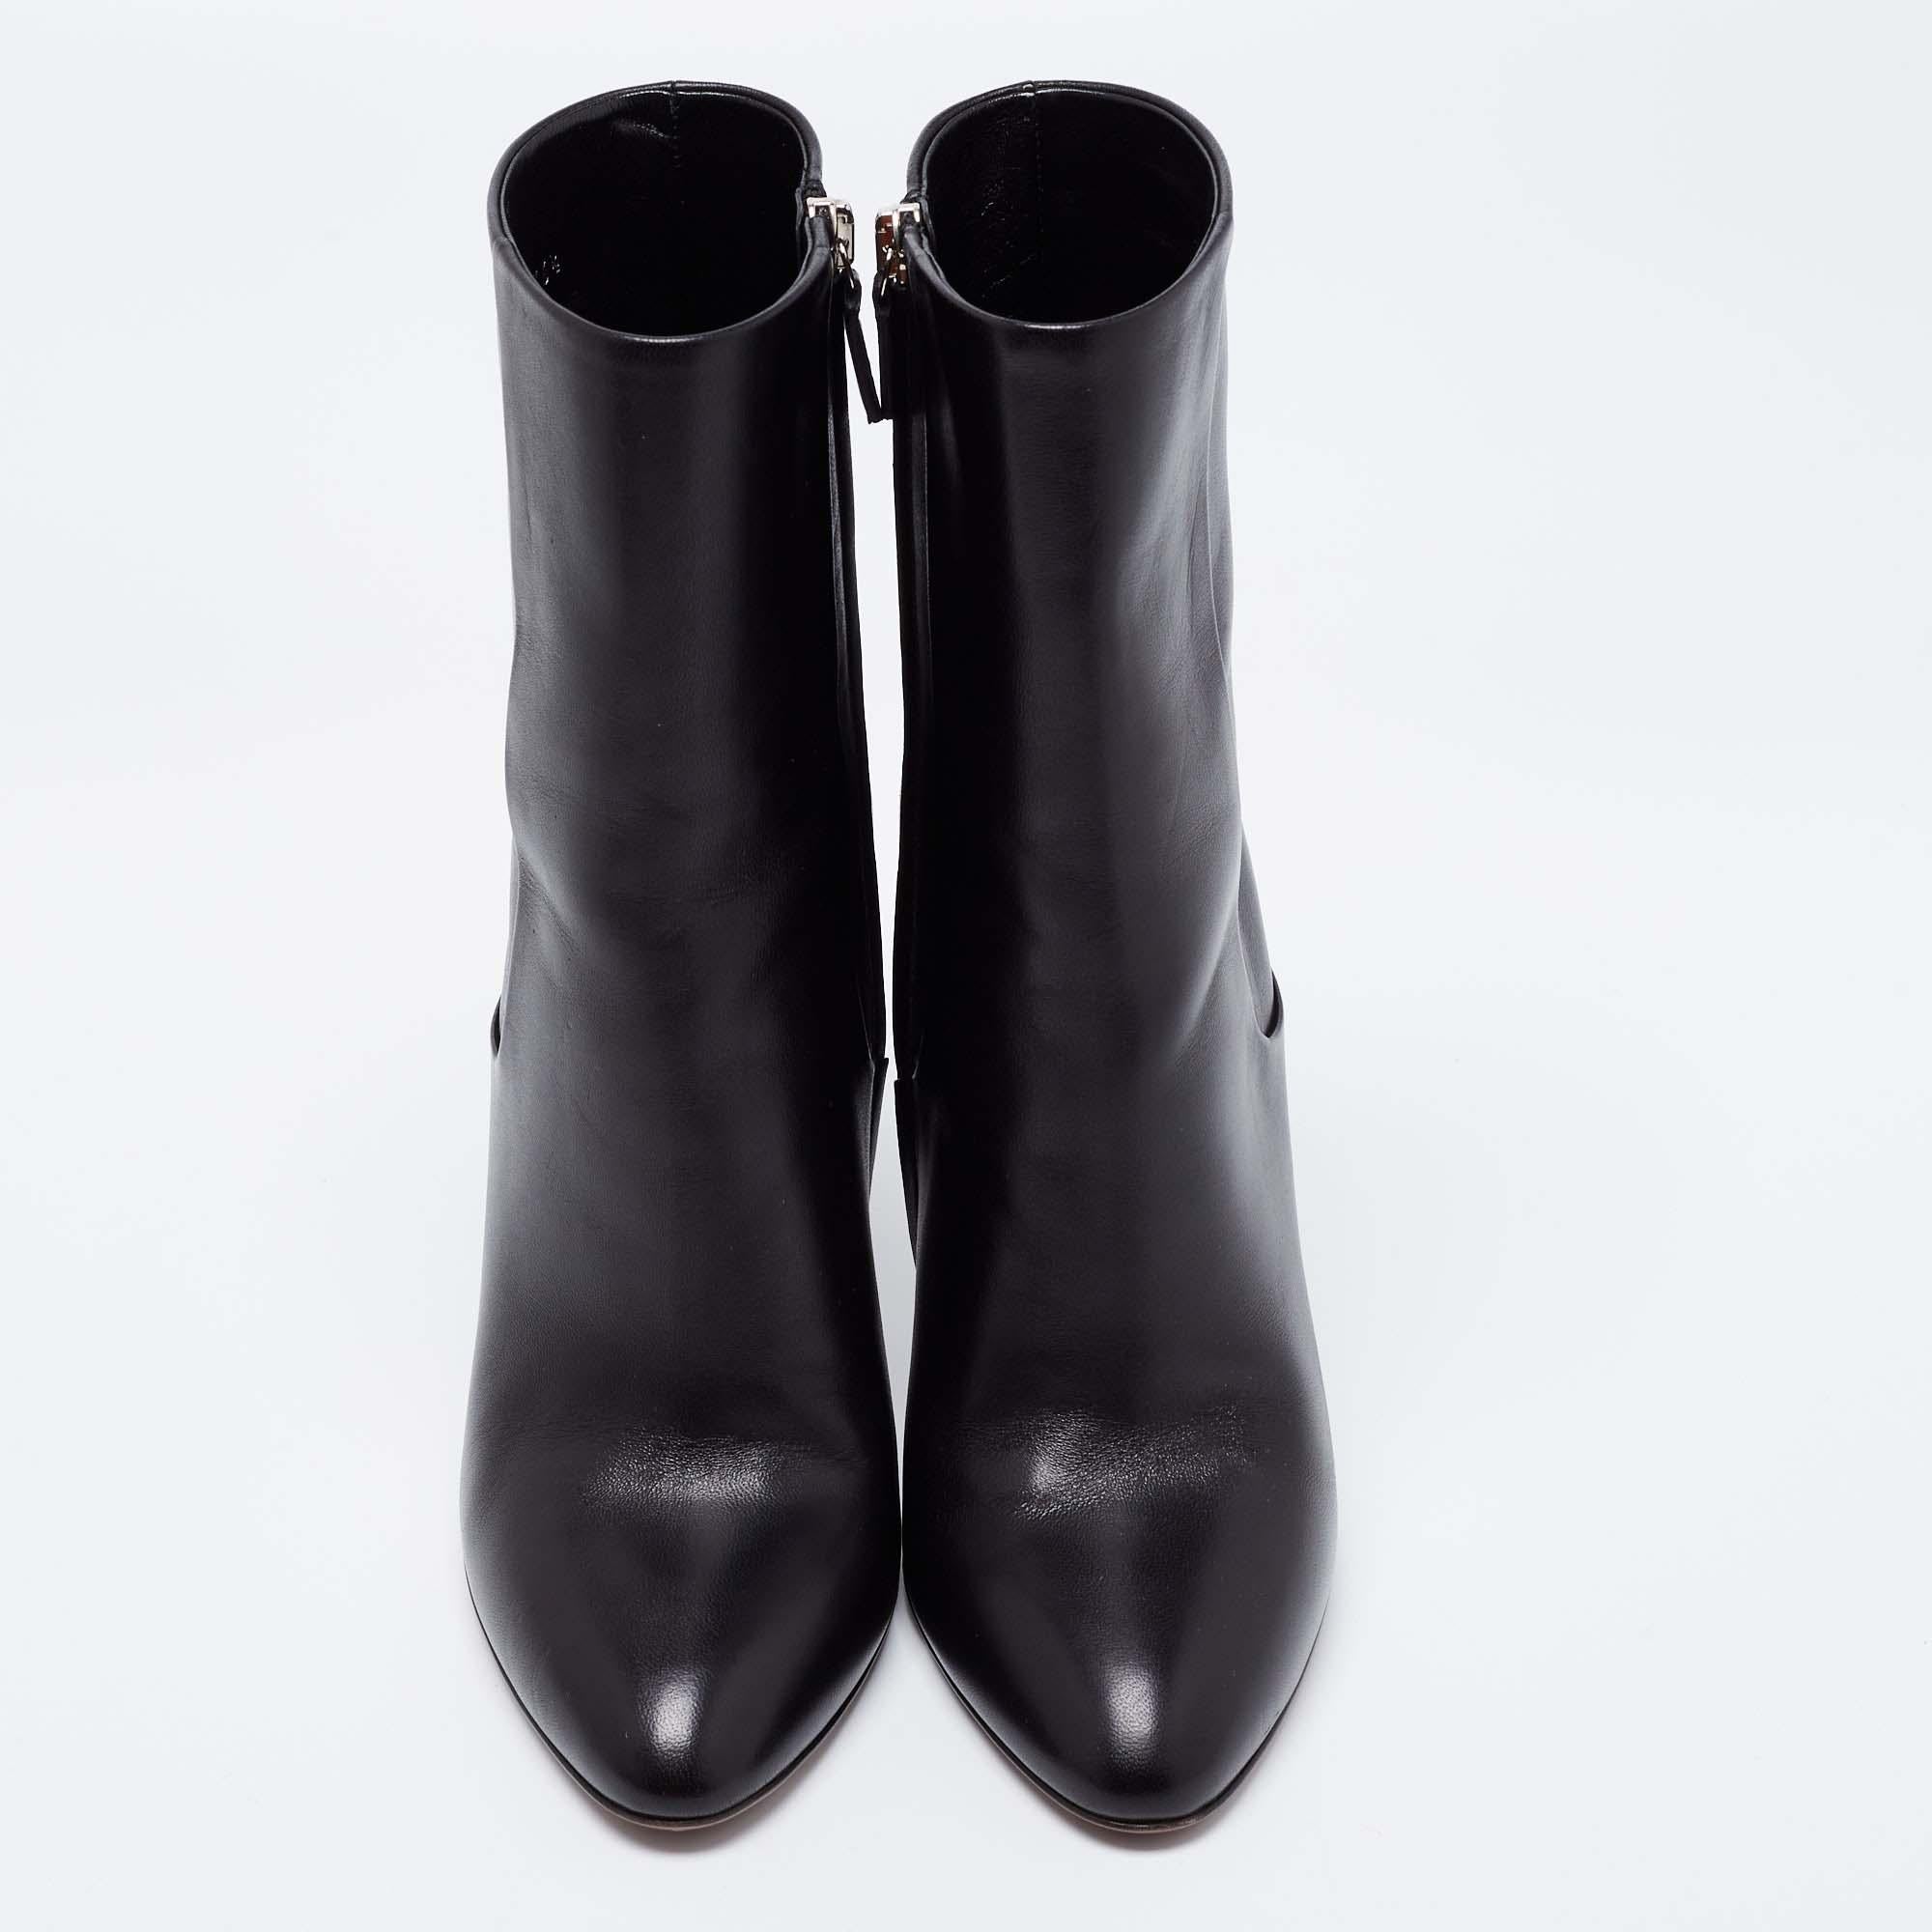 The house of Gucci promises to elevate your style with this fabulous pair of ankle boots. Casual Fridays will look so much better at work thanks to these black leather boots. They feature pointed toes and zippers on the side and are balanced on 11